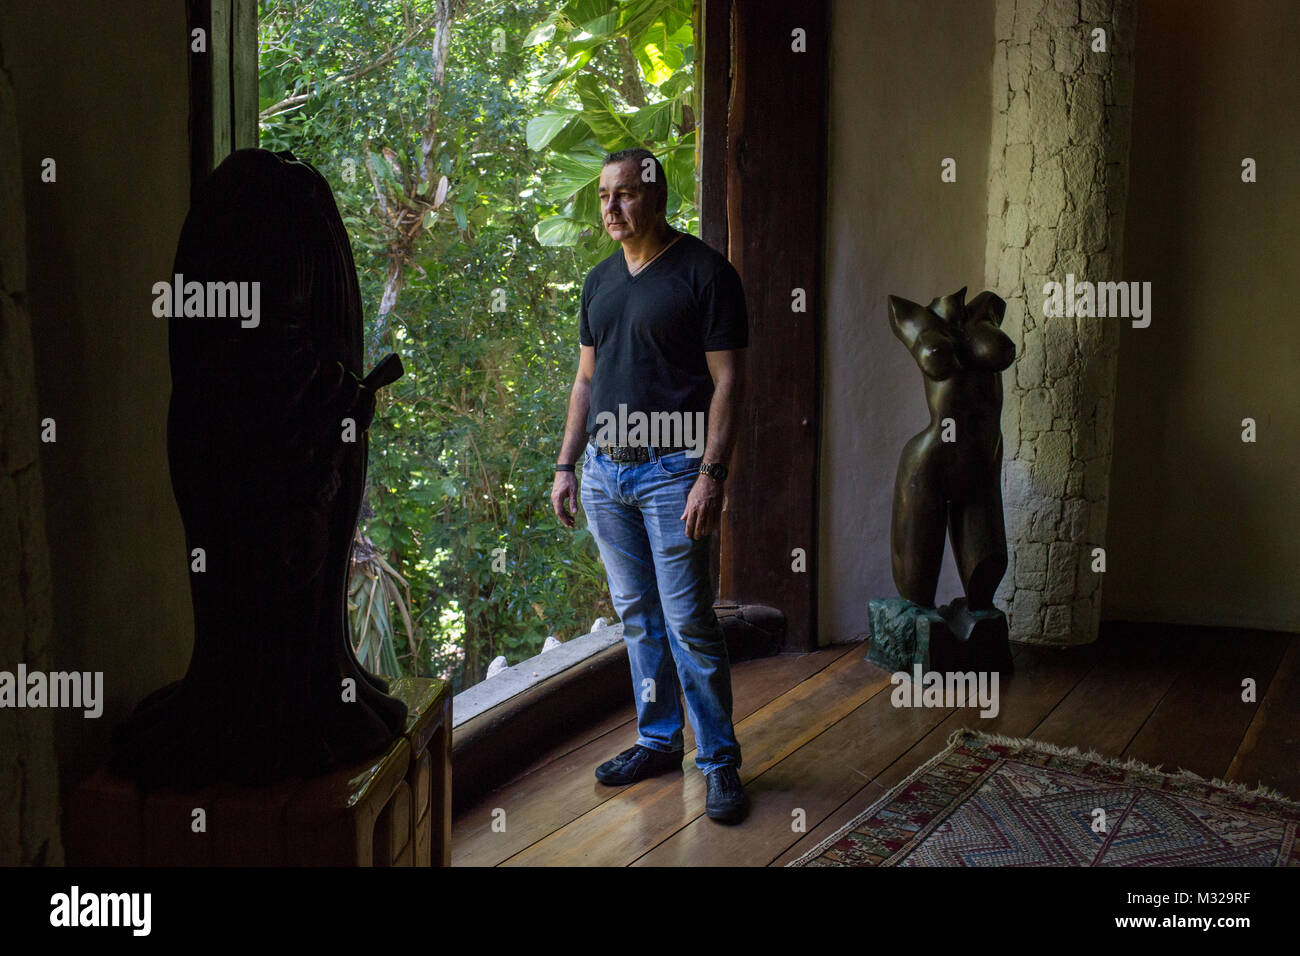 Carlos Mimenza, an entrepreneur, poses for a photo in one of his homes in Playa del Carmen, Mexico, on July 11, 2017. Mimenza represents a group of business owners who employ security forces to protect their businesses from extortion. This house is home to a team of computer experts who monitor people of interest. Stock Photo